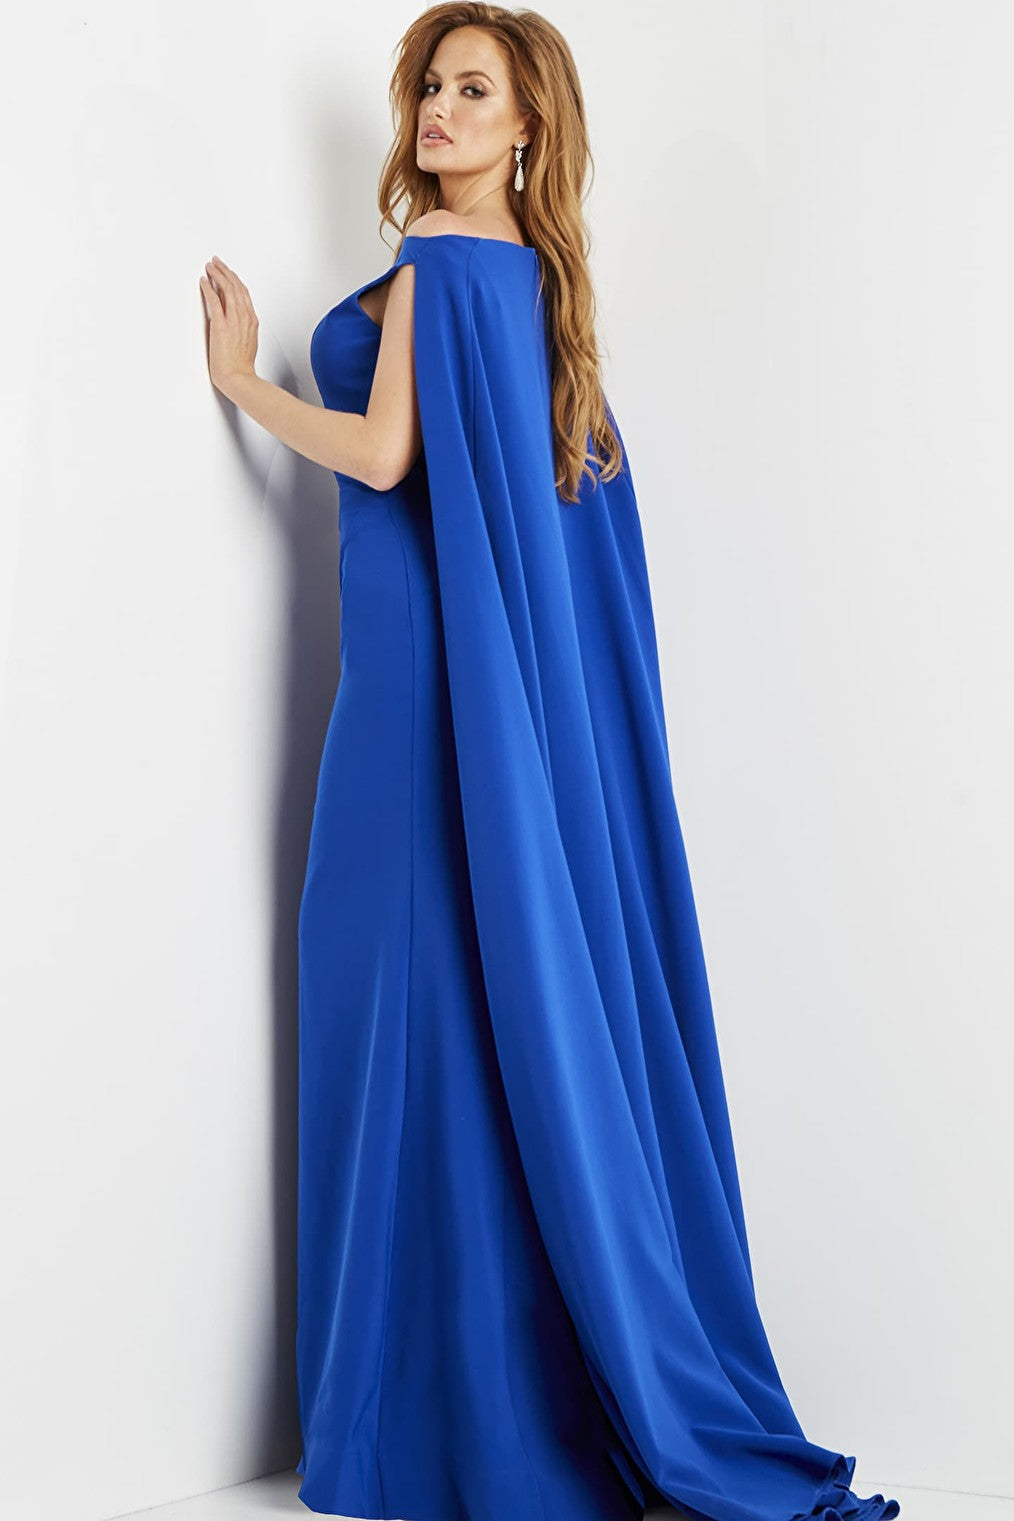 Royal simple evening gown 09755